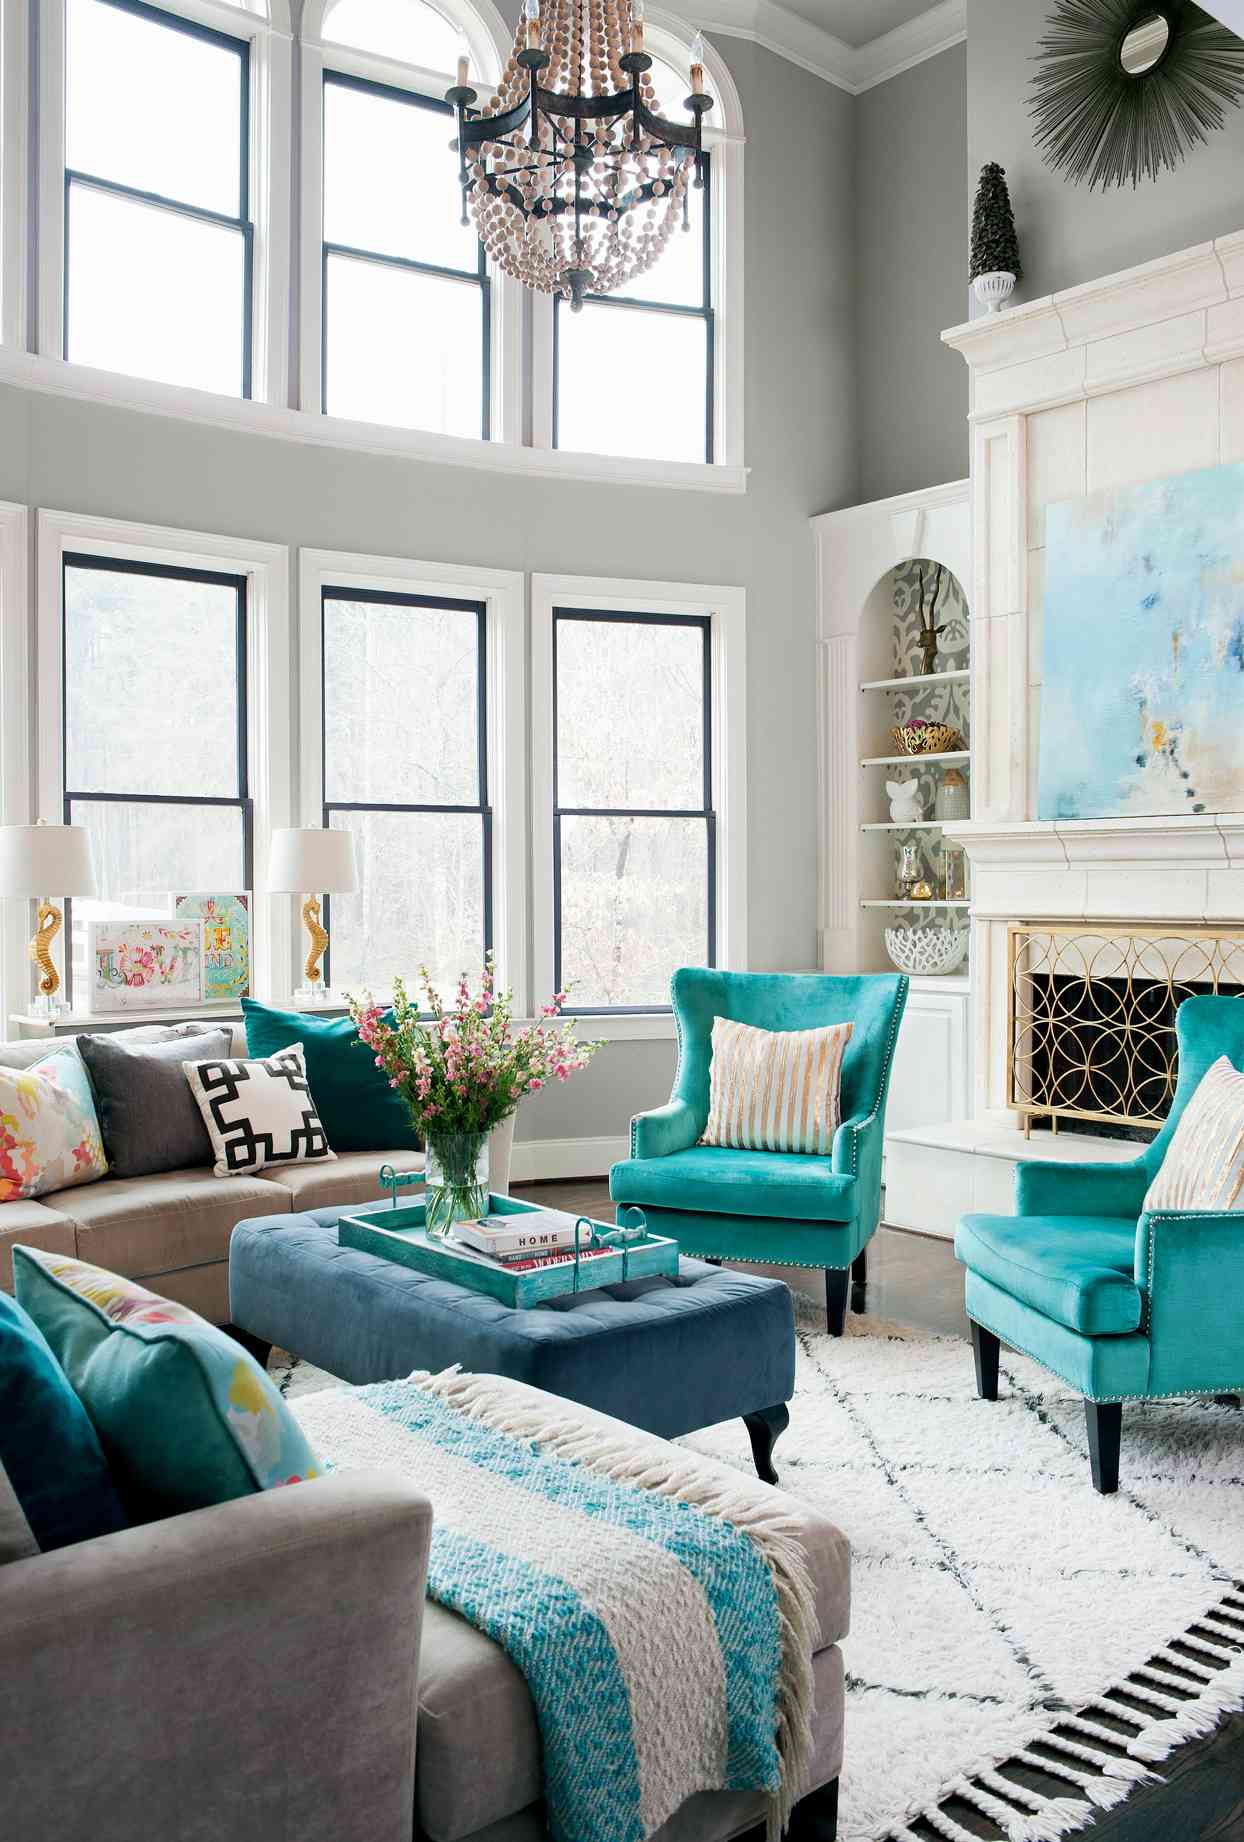 grey walls with turquoise furniture